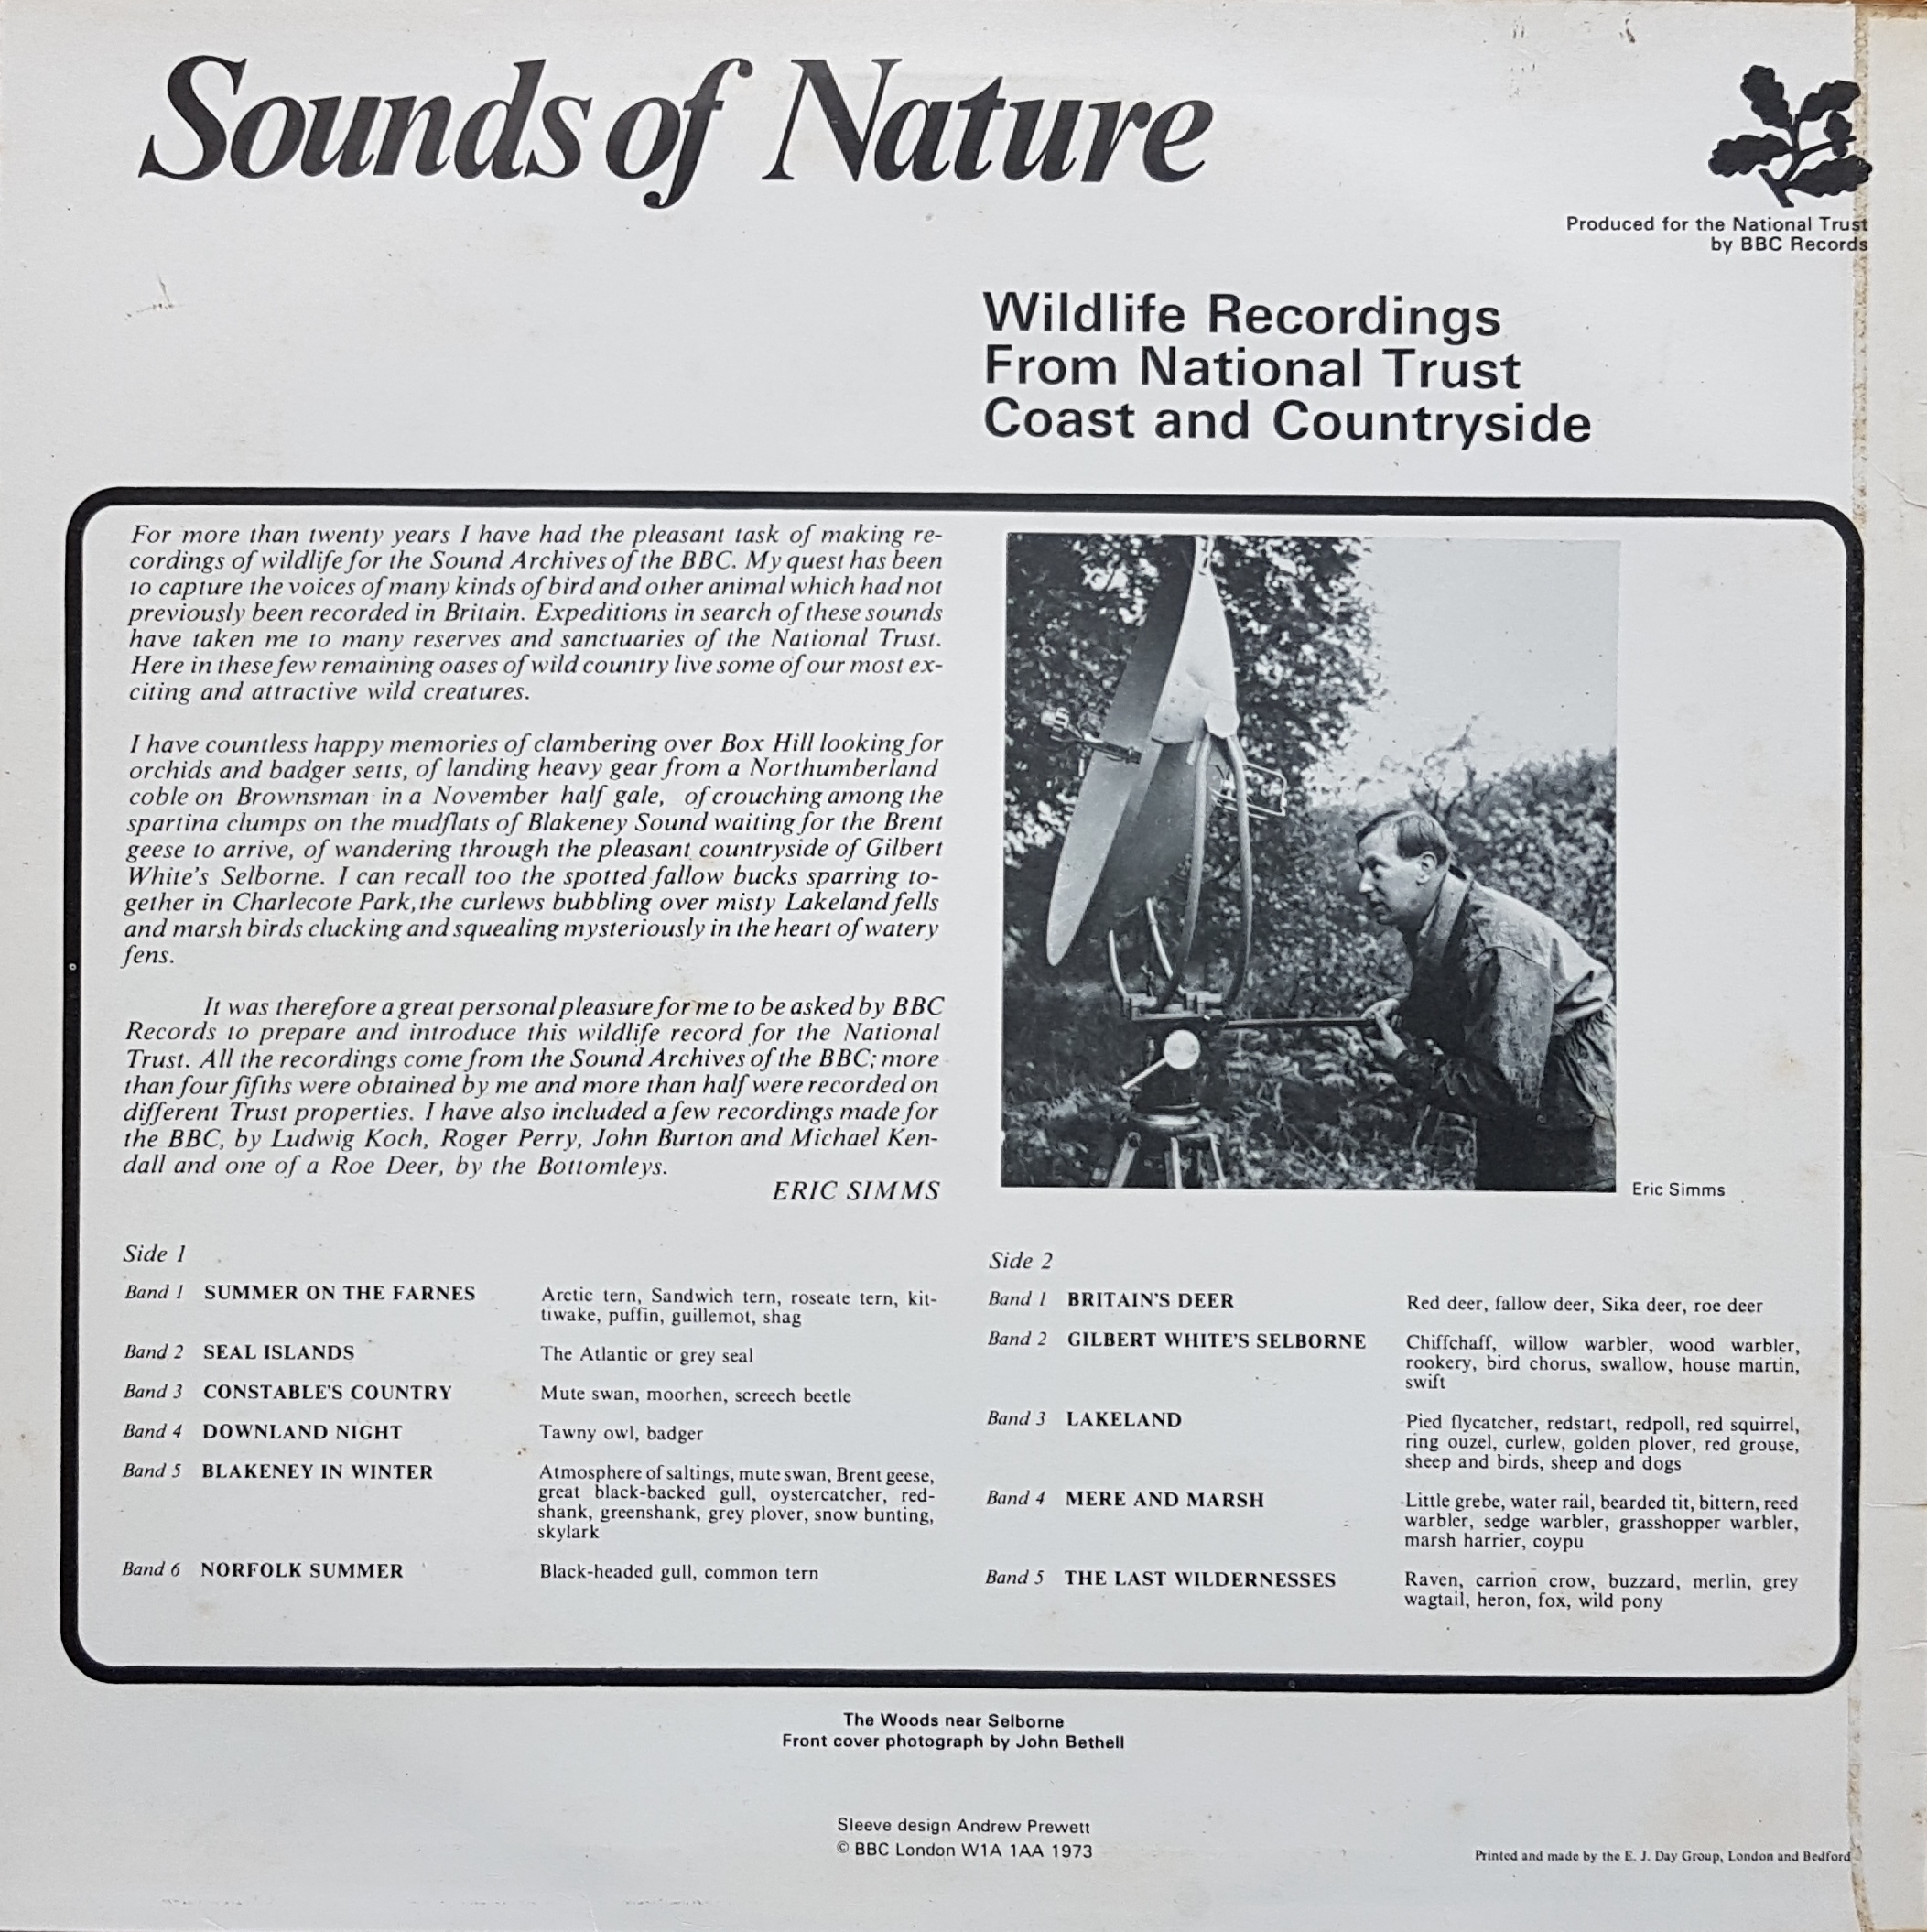 Picture of RE 145 Sounds of nature by artist Eric Simms from the BBC records and Tapes library